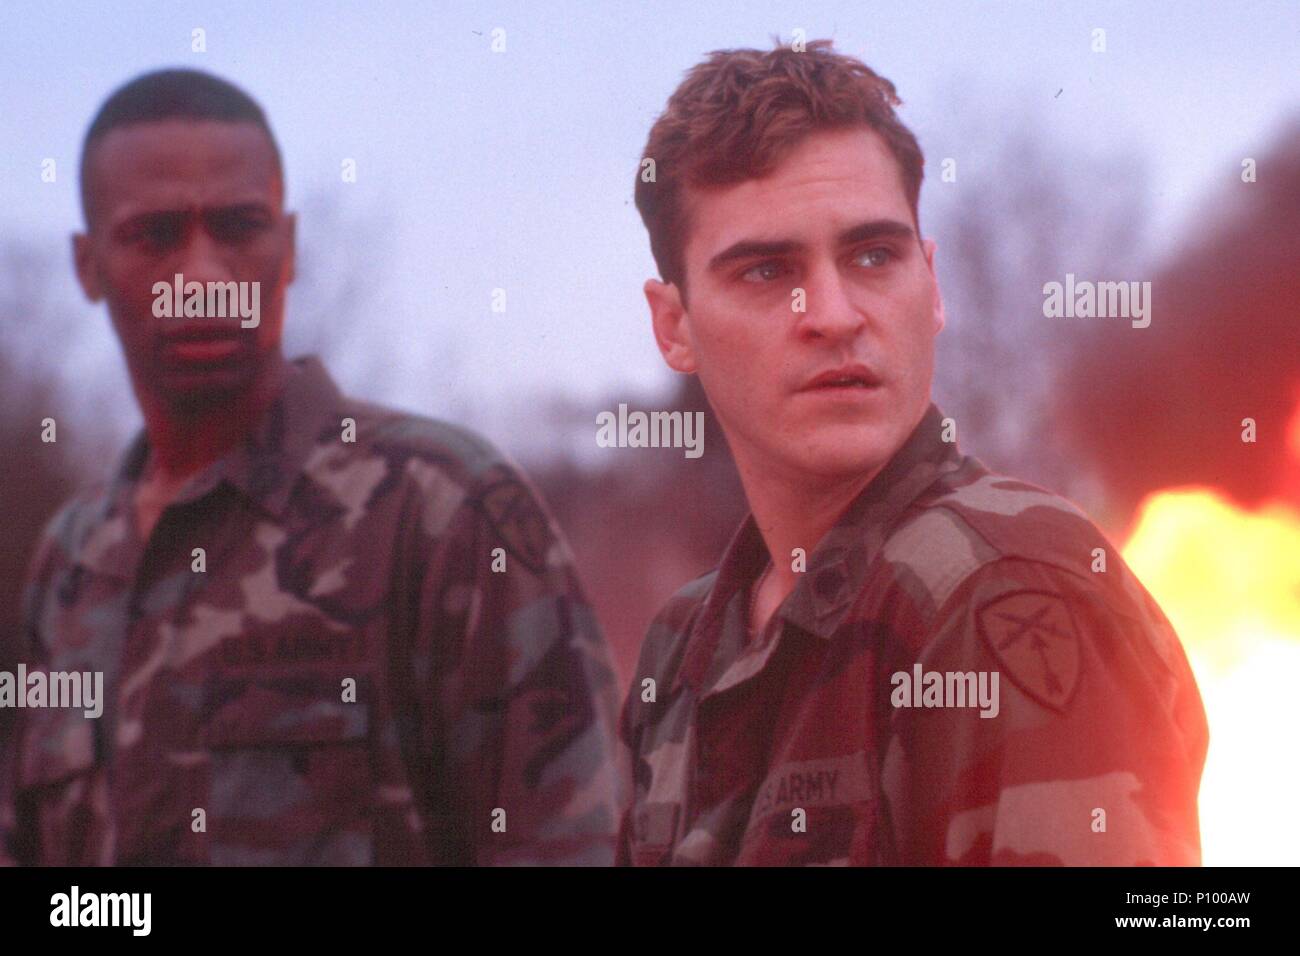 Film Title: BUFFALO SOLDIERS. Title: BUFFALO SOLDIERS. Film Director: GREGOR JORDAN. Year: 2001. Stars: JOAQUIN PHOENIX. Editorial inside use only. This is a publicly distributed handout. Access rights